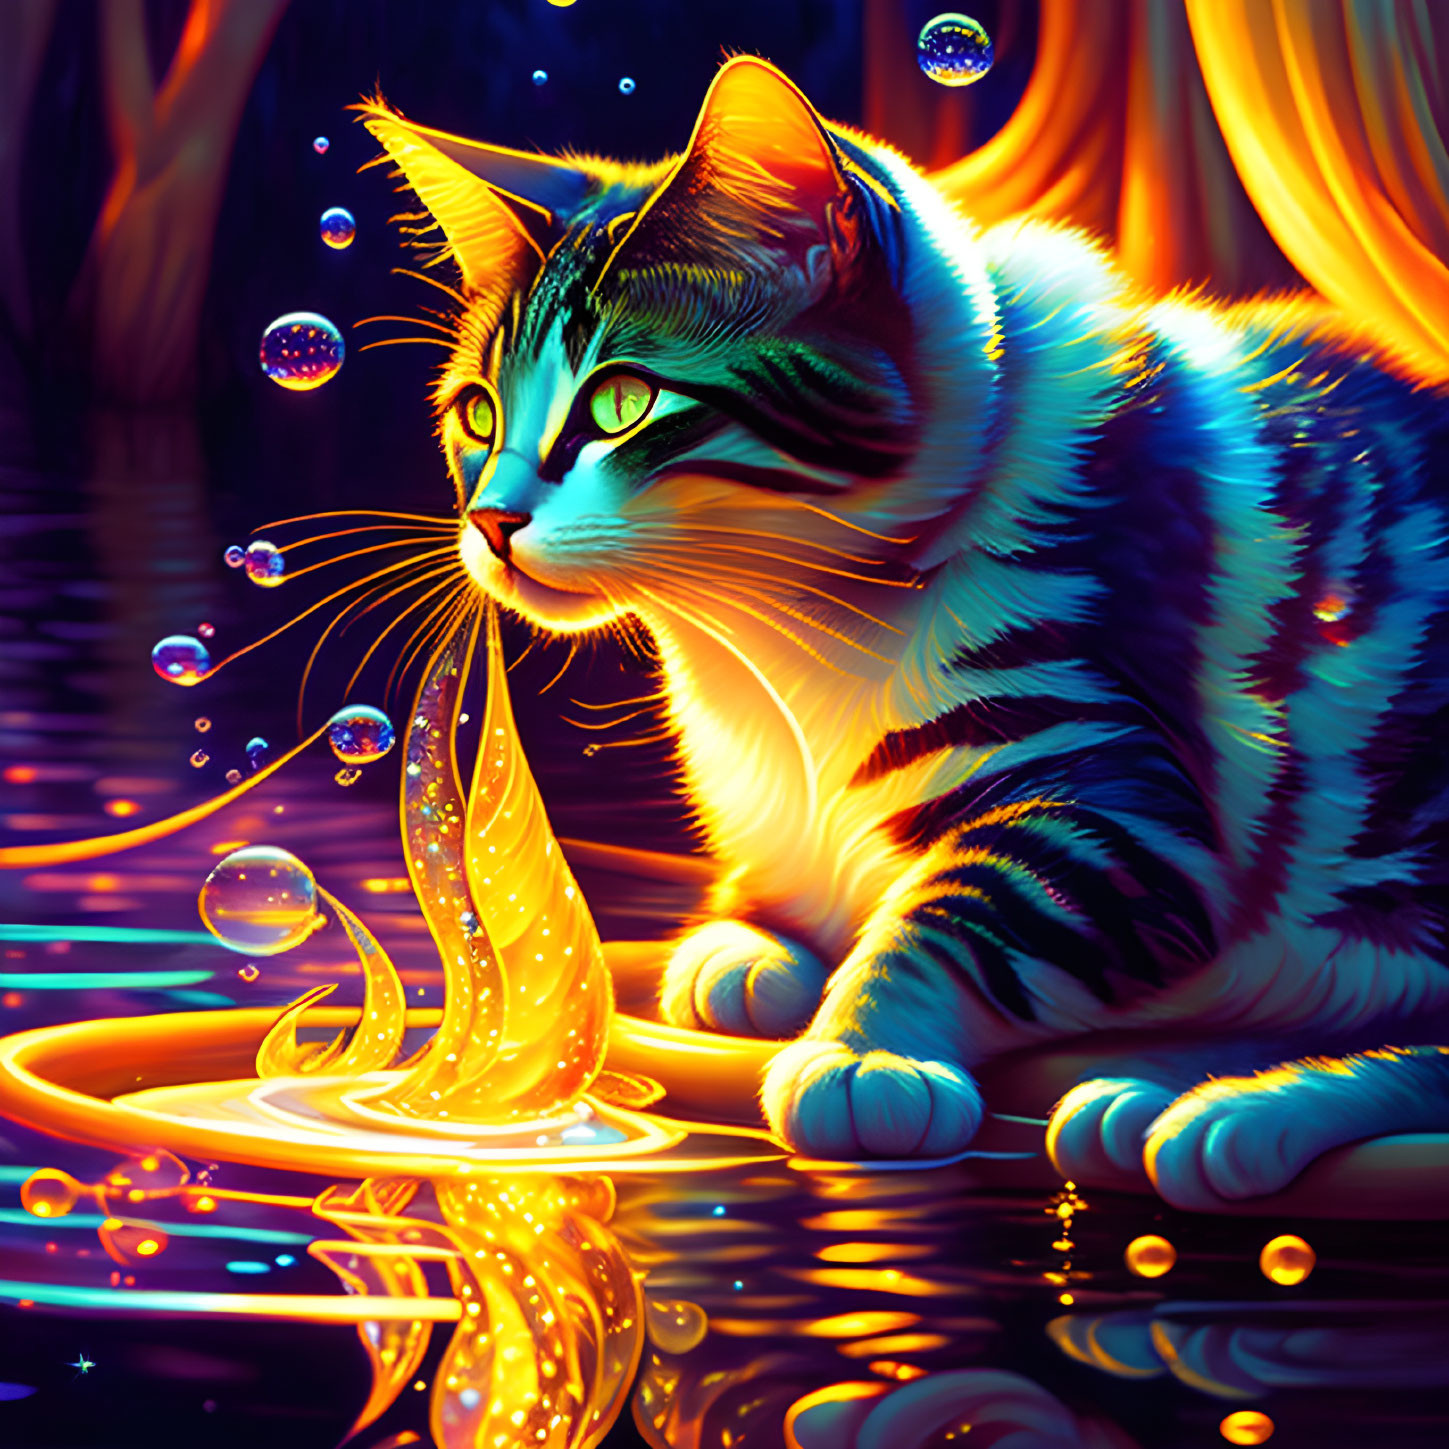 Colorful Cat Illustration with Water, Vibrant Reflections, Bubbles, and Whimsical